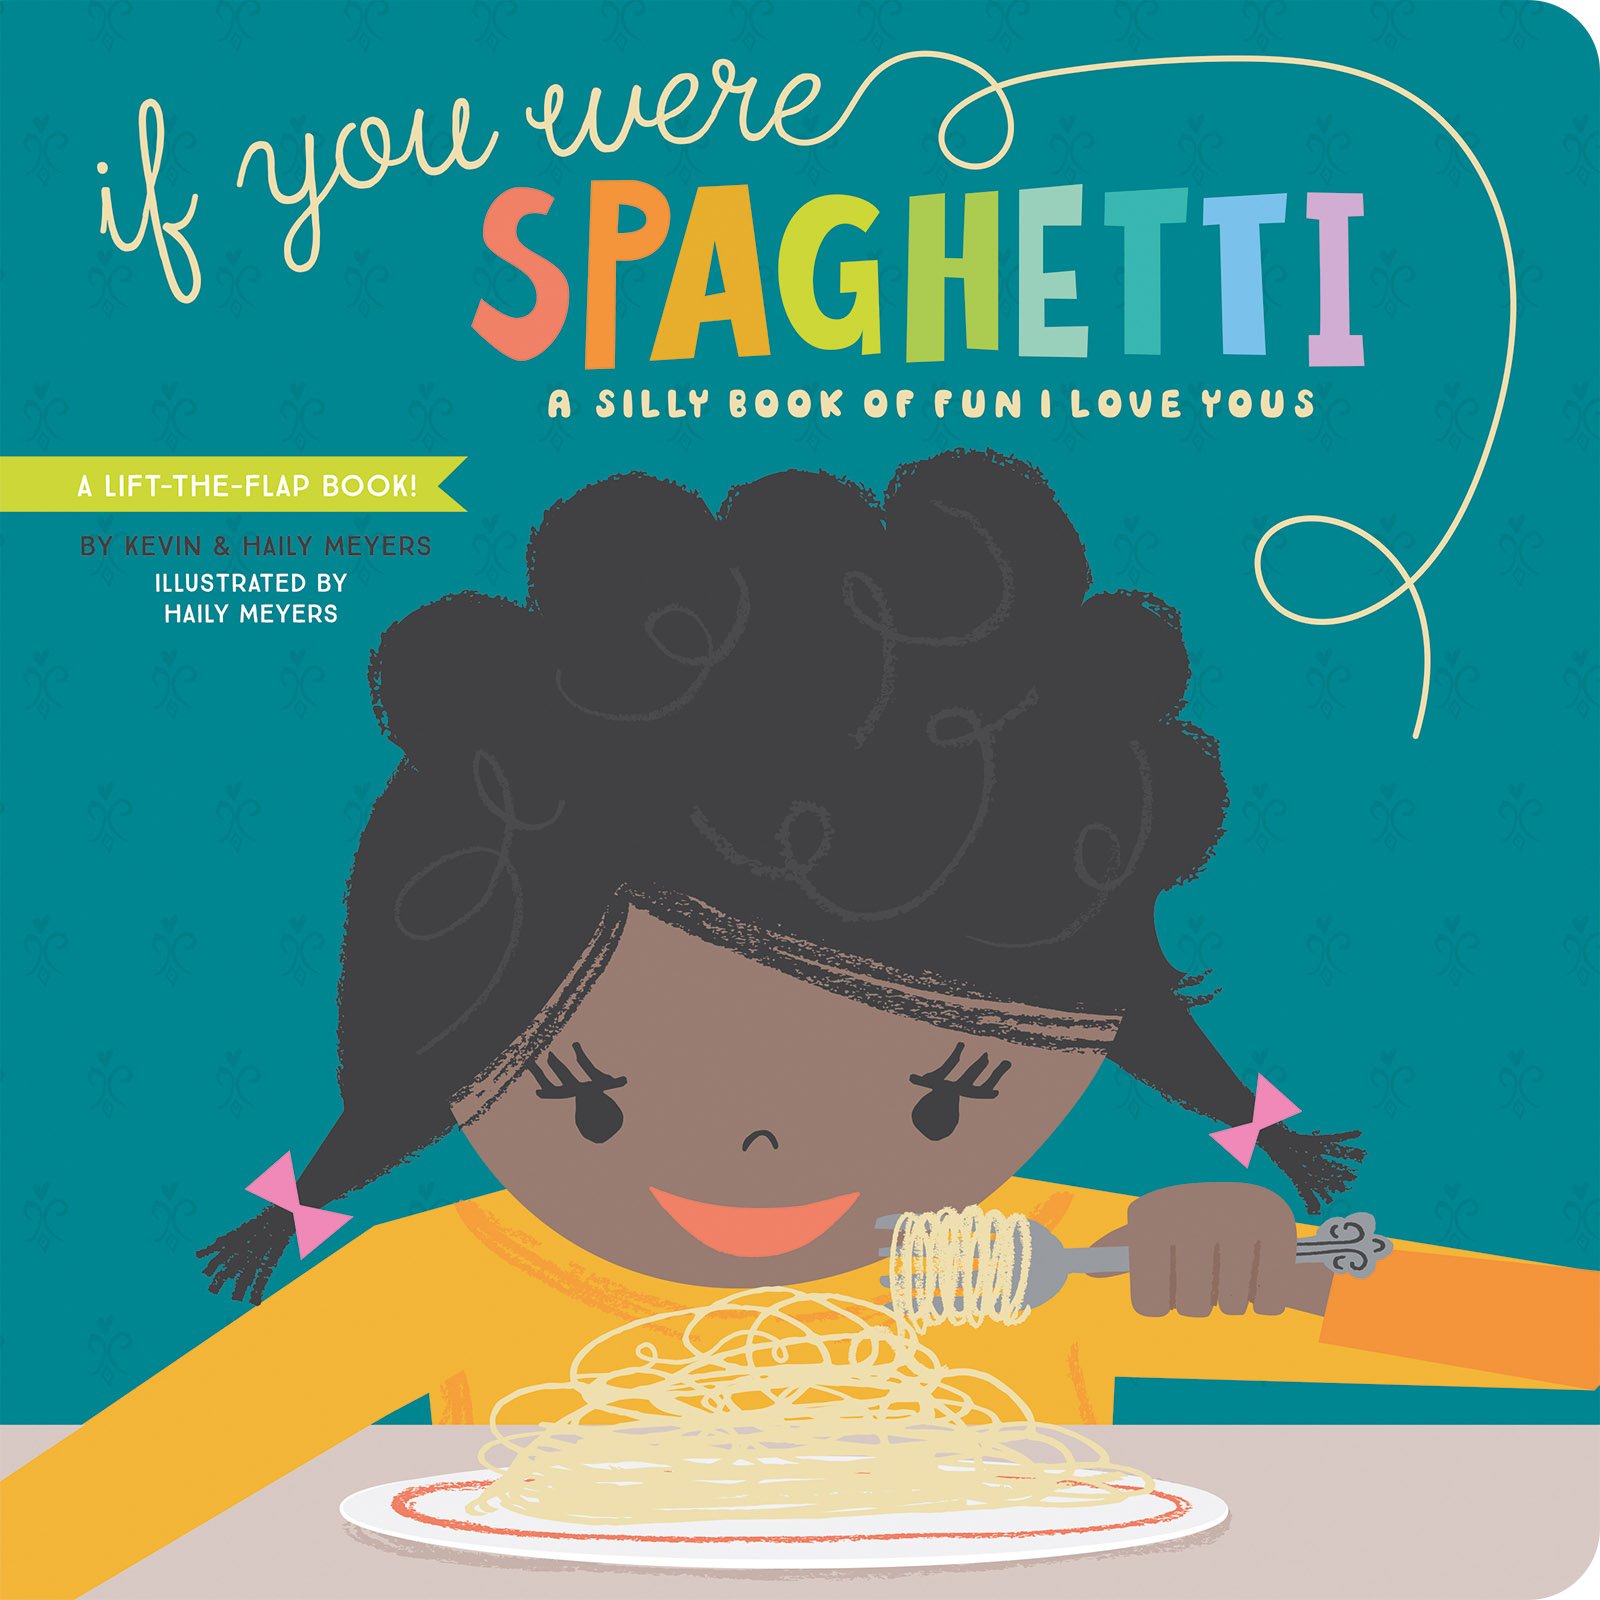 If You Were Spaghetti: A Silly Book of Fun I Love Yous (Lucy Darling)